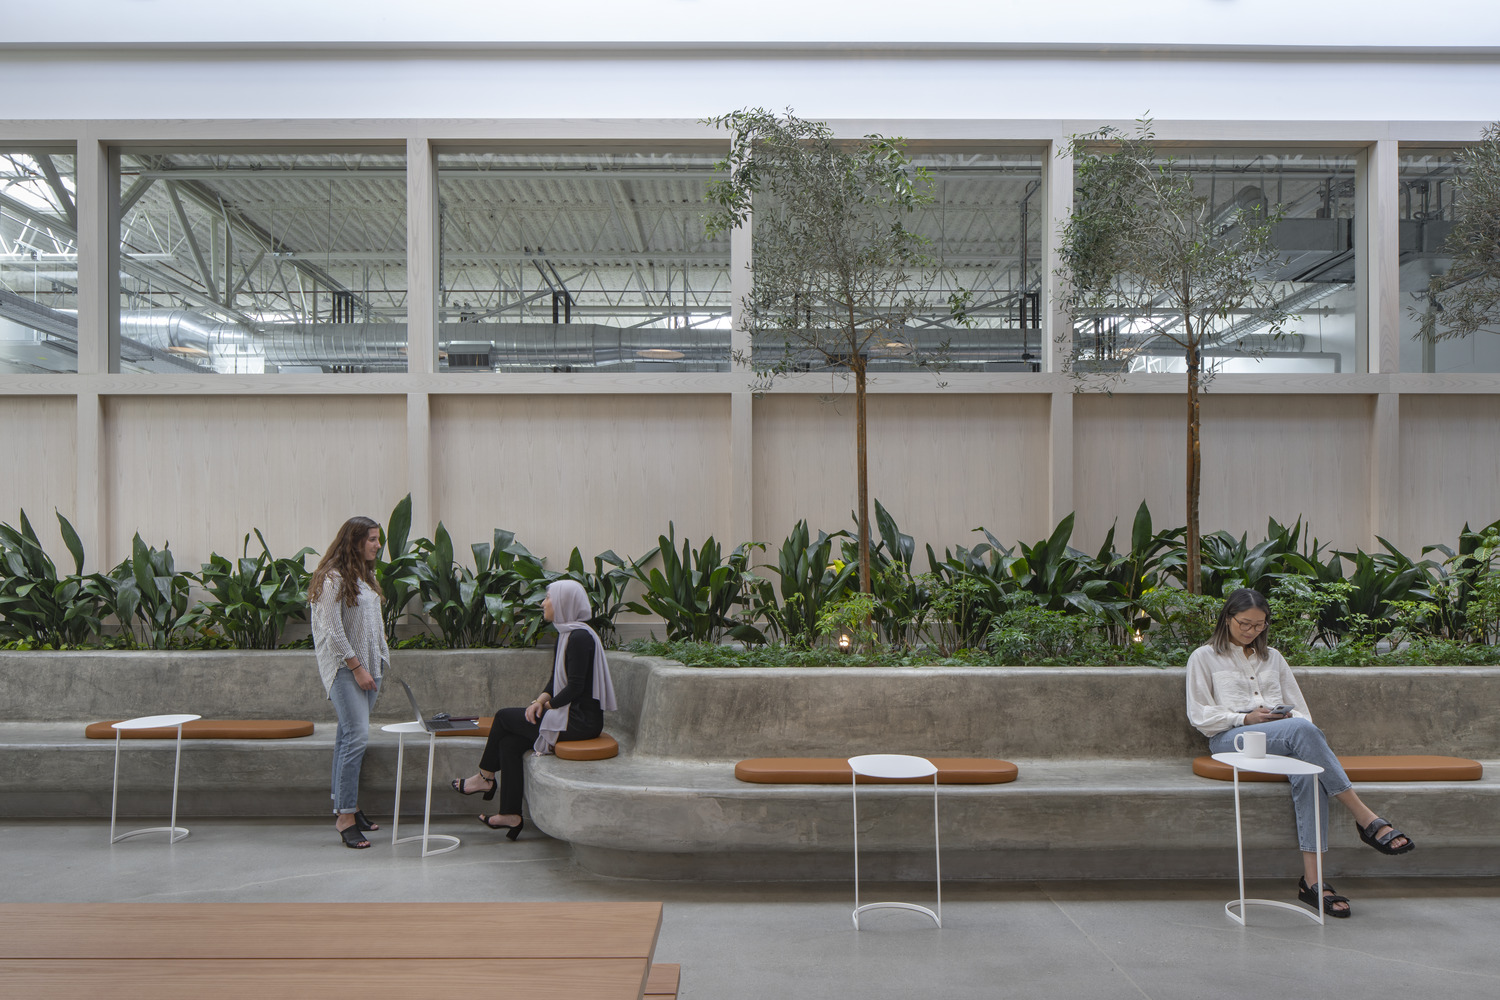 Spacious lobby with a biophilic design featuring an indoor garden bed, wooden paneling, and a skylight. Modern benches and side tables accommodate visitors amid the lush greenery, combining functionality with a connection to nature.